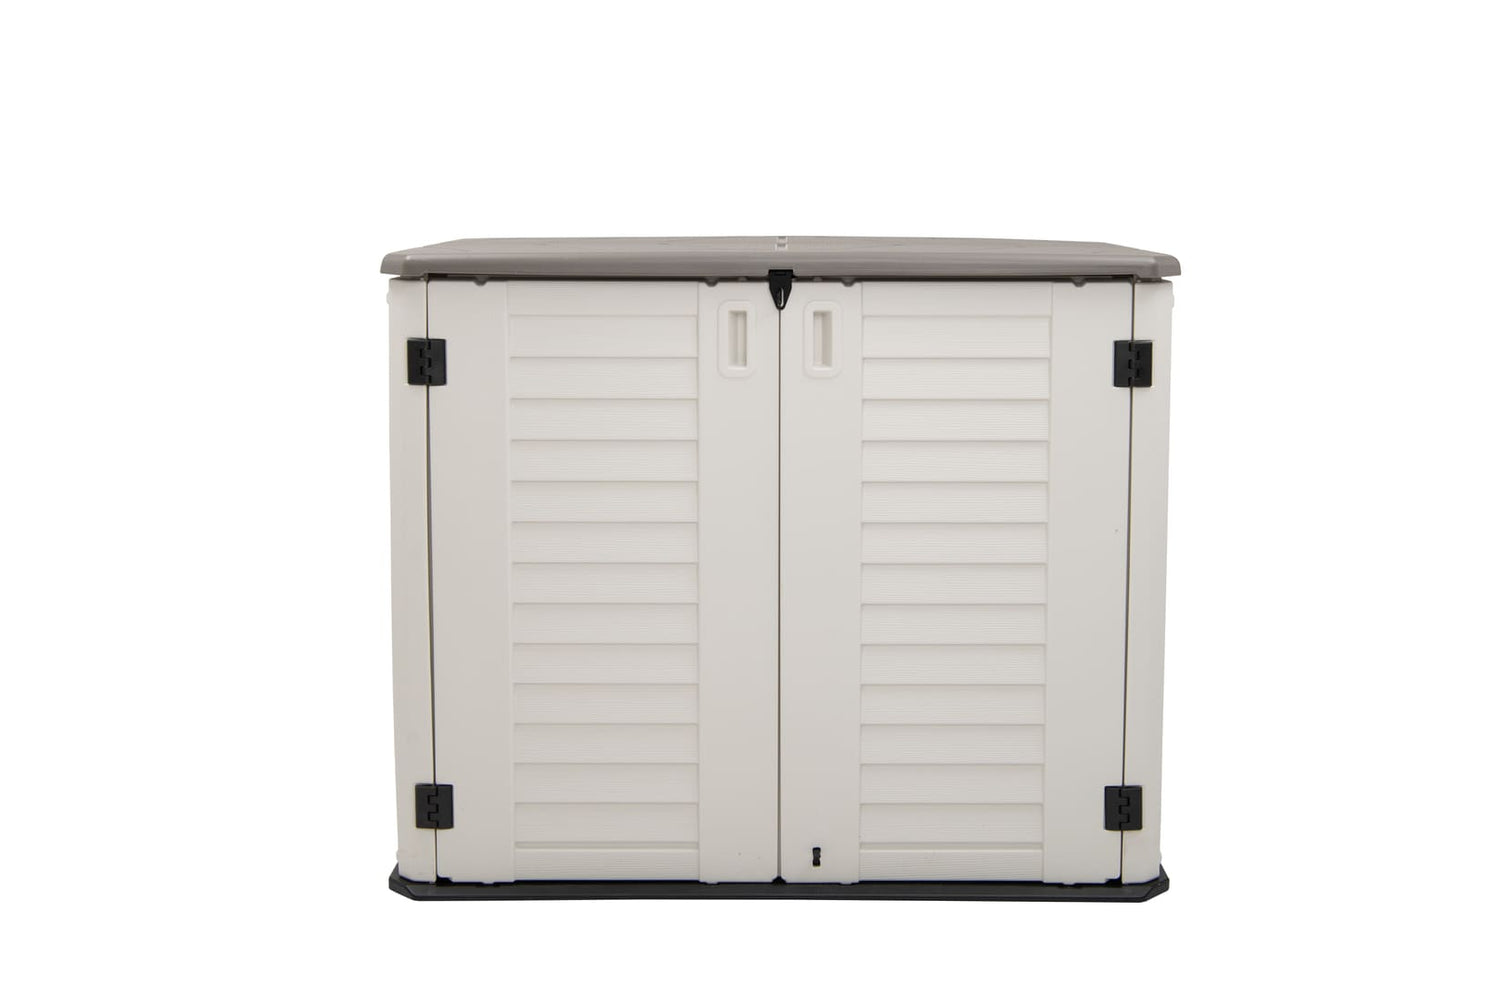 Organize Outdoors Faster: 26 Cu. Ft. Plastic Shed - Horti Cubic